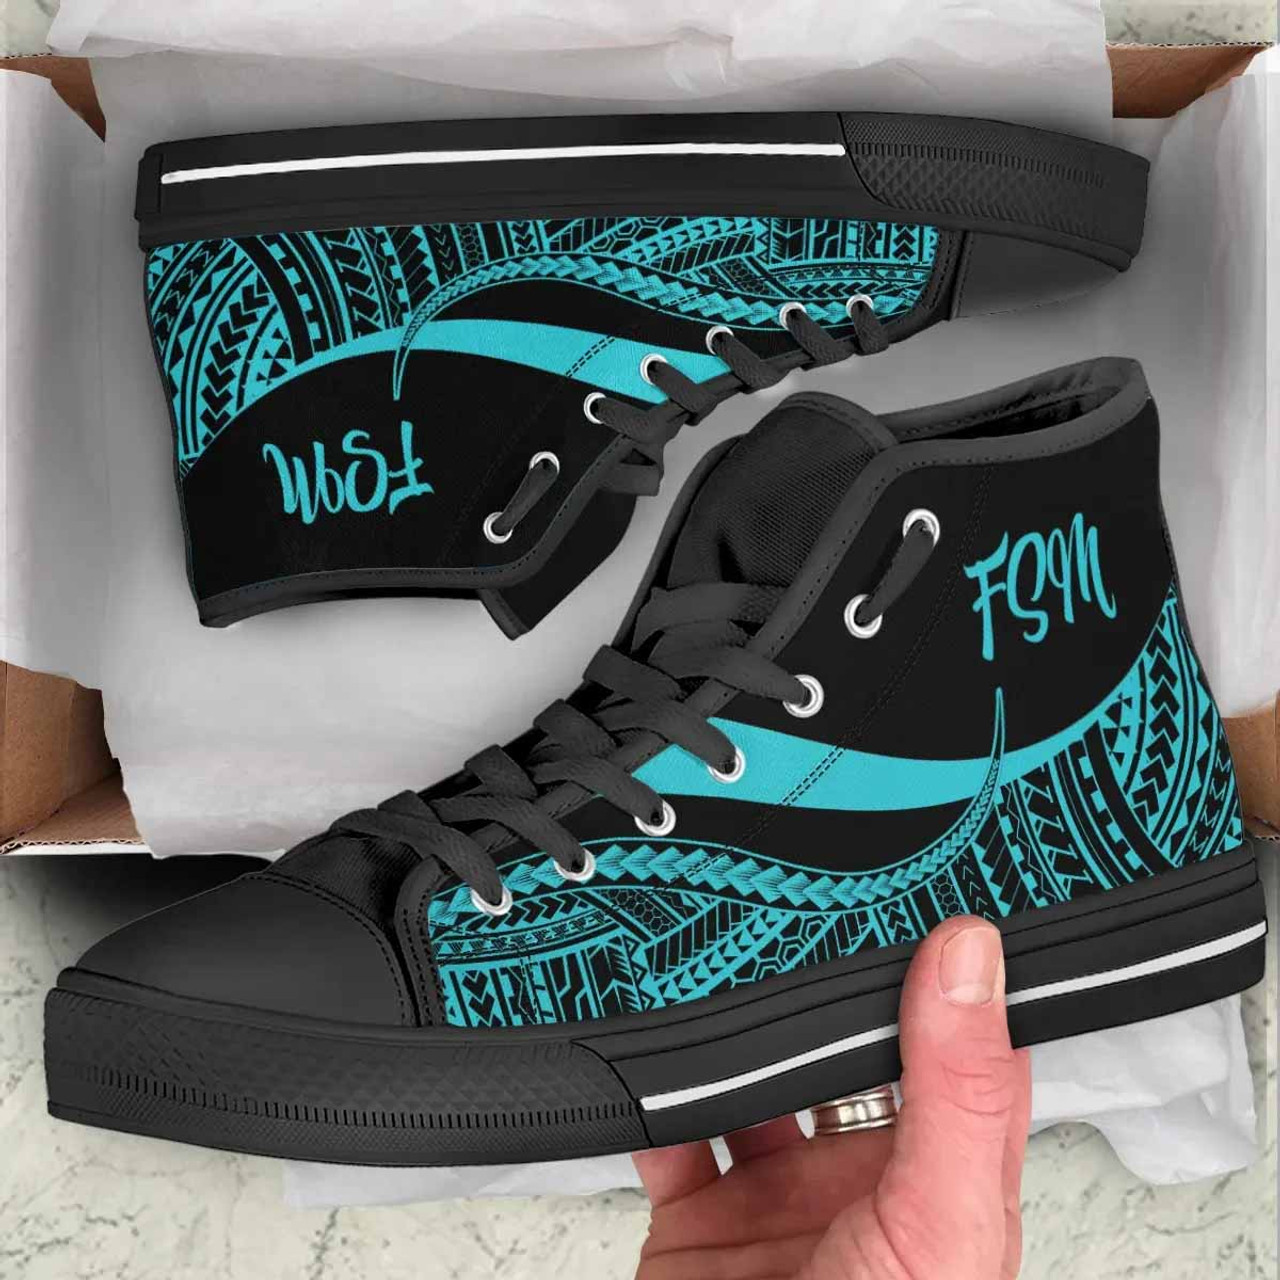 Federated States of Micronesia High Top Shoes Turquoise - Polynesian Tentacle Tribal Pattern 1